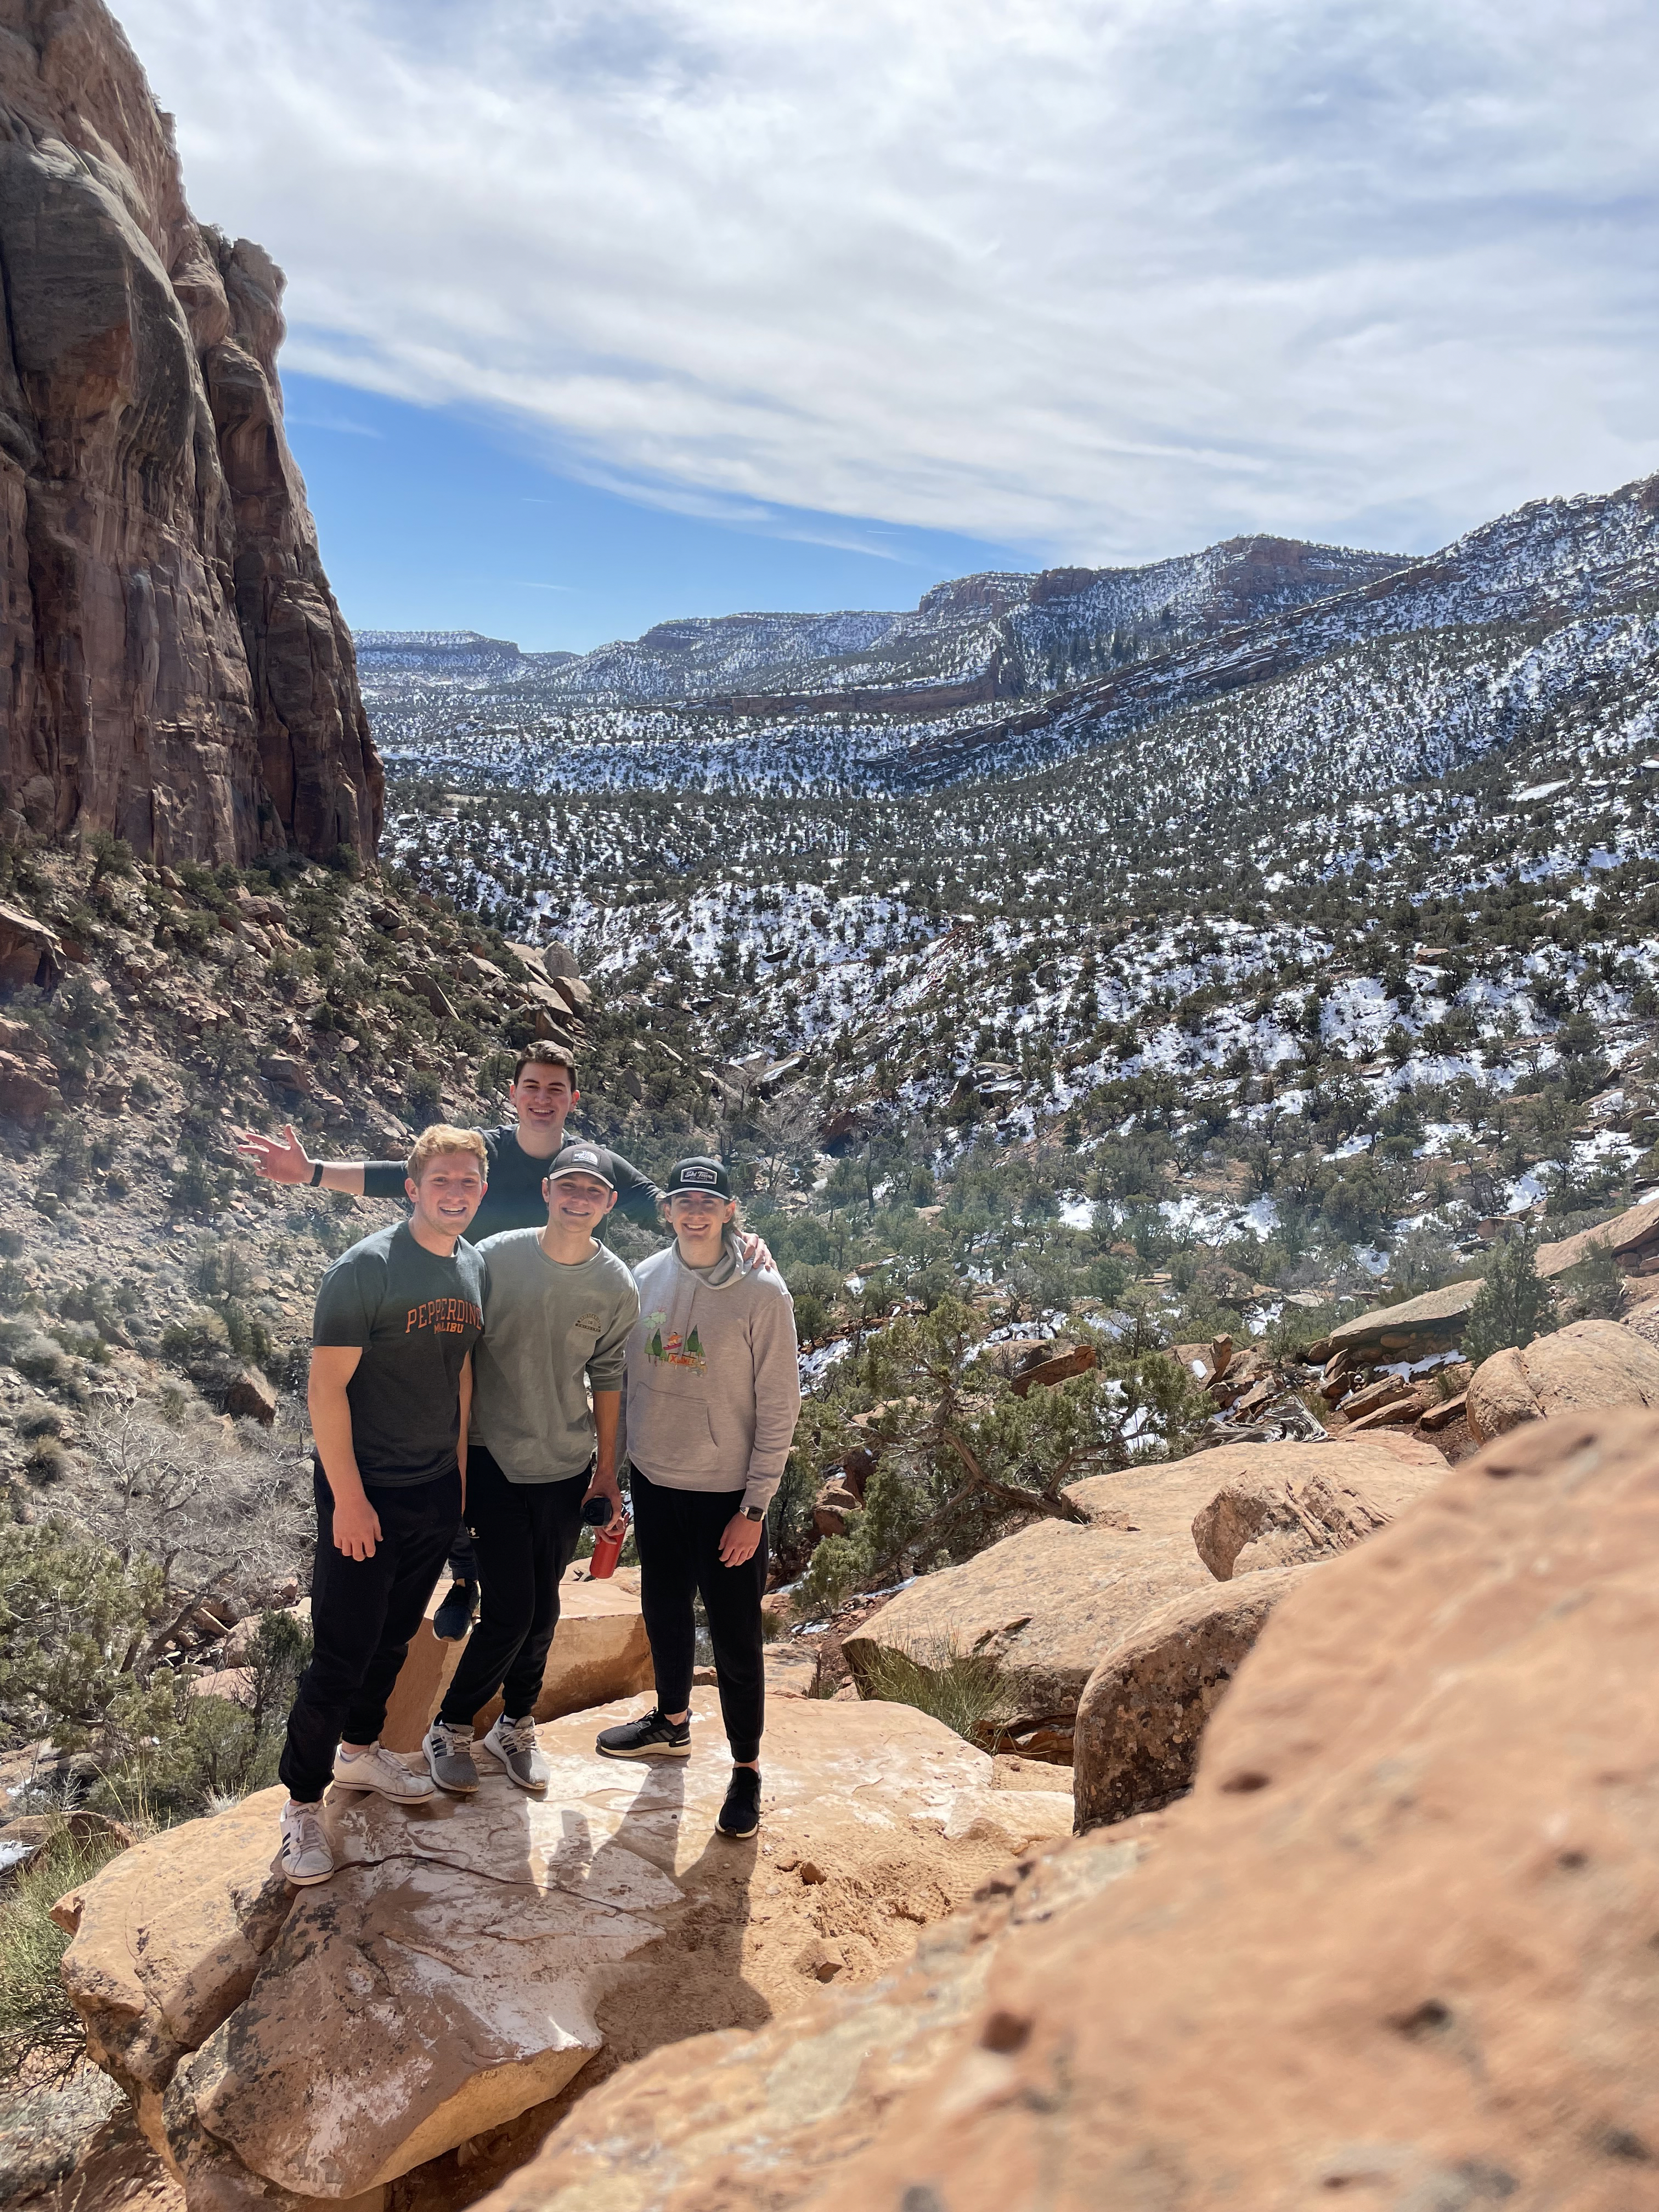 Hiking in the Colorado National Monument